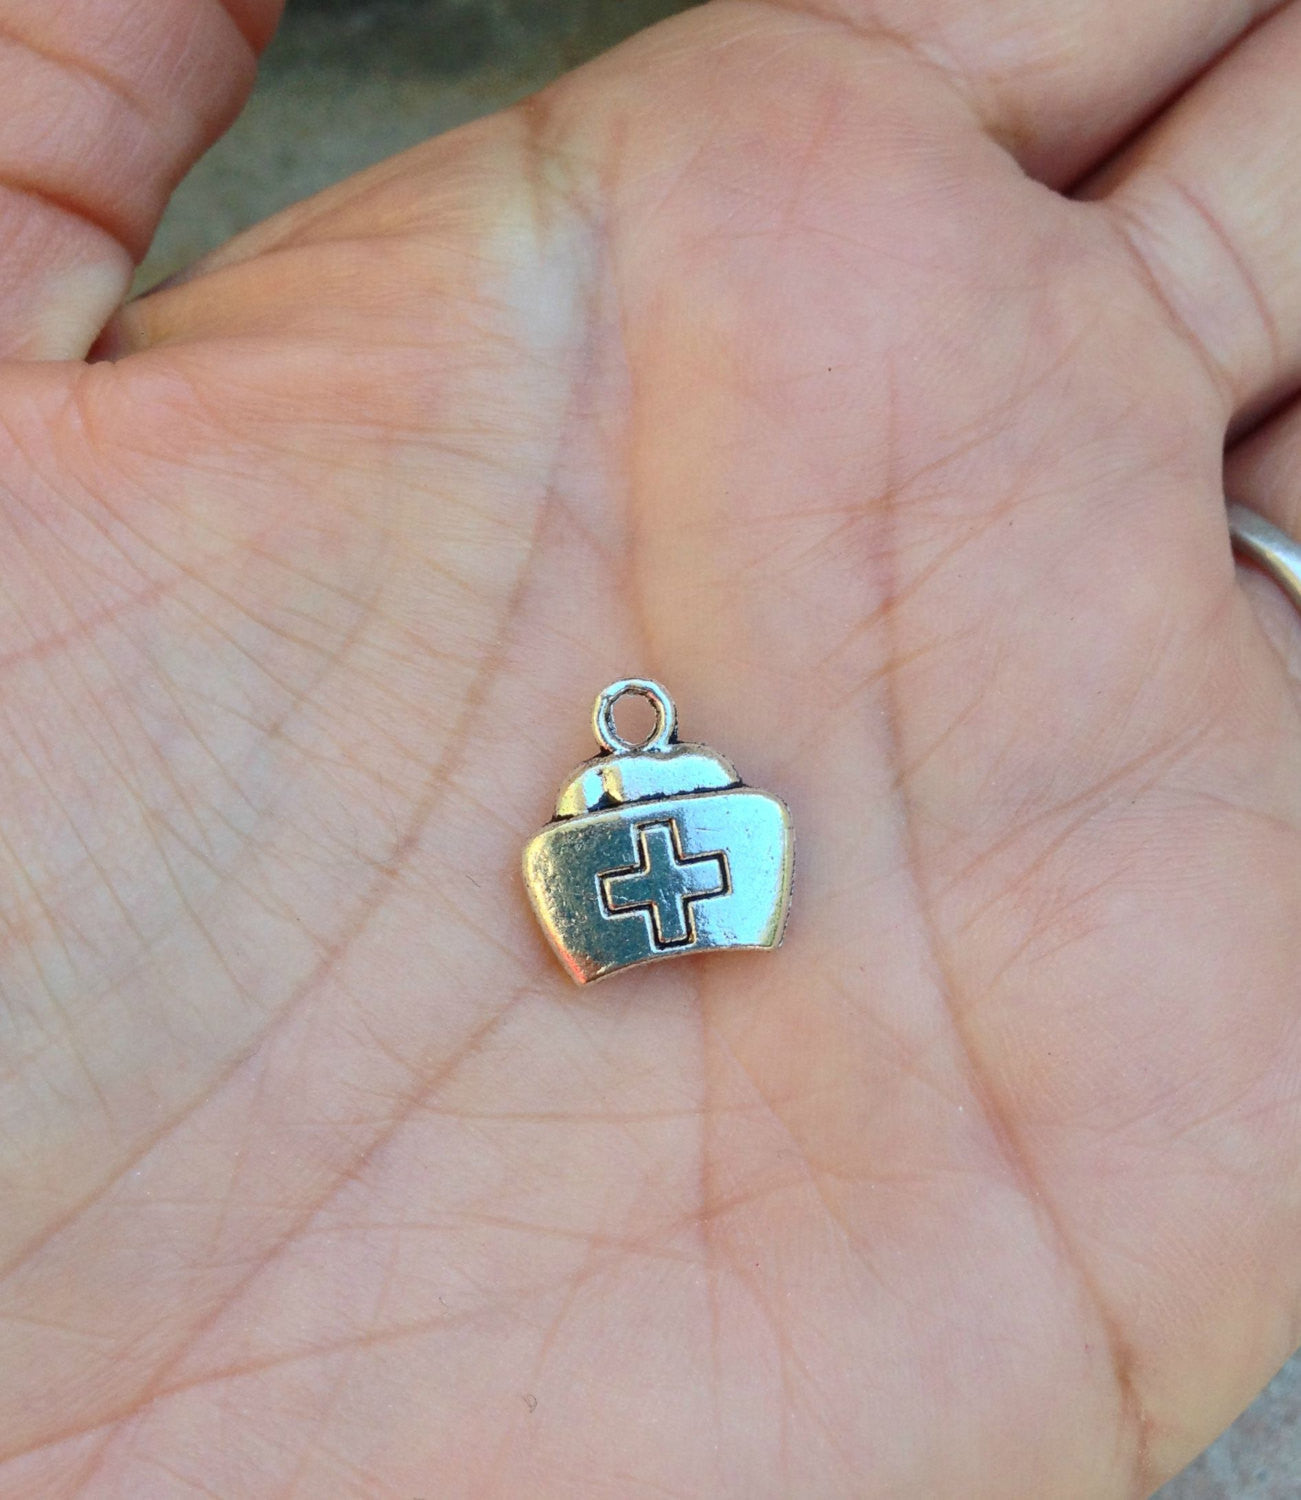 wine glass charm, wine charm, cowgirl boot charm, glass charm, nurse charm, charms, add a charm, natashaaloha charms - Natashaaloha, jewelry, bracelets, necklace, keychains, fishing lures, gifts for men, charms, personalized, 